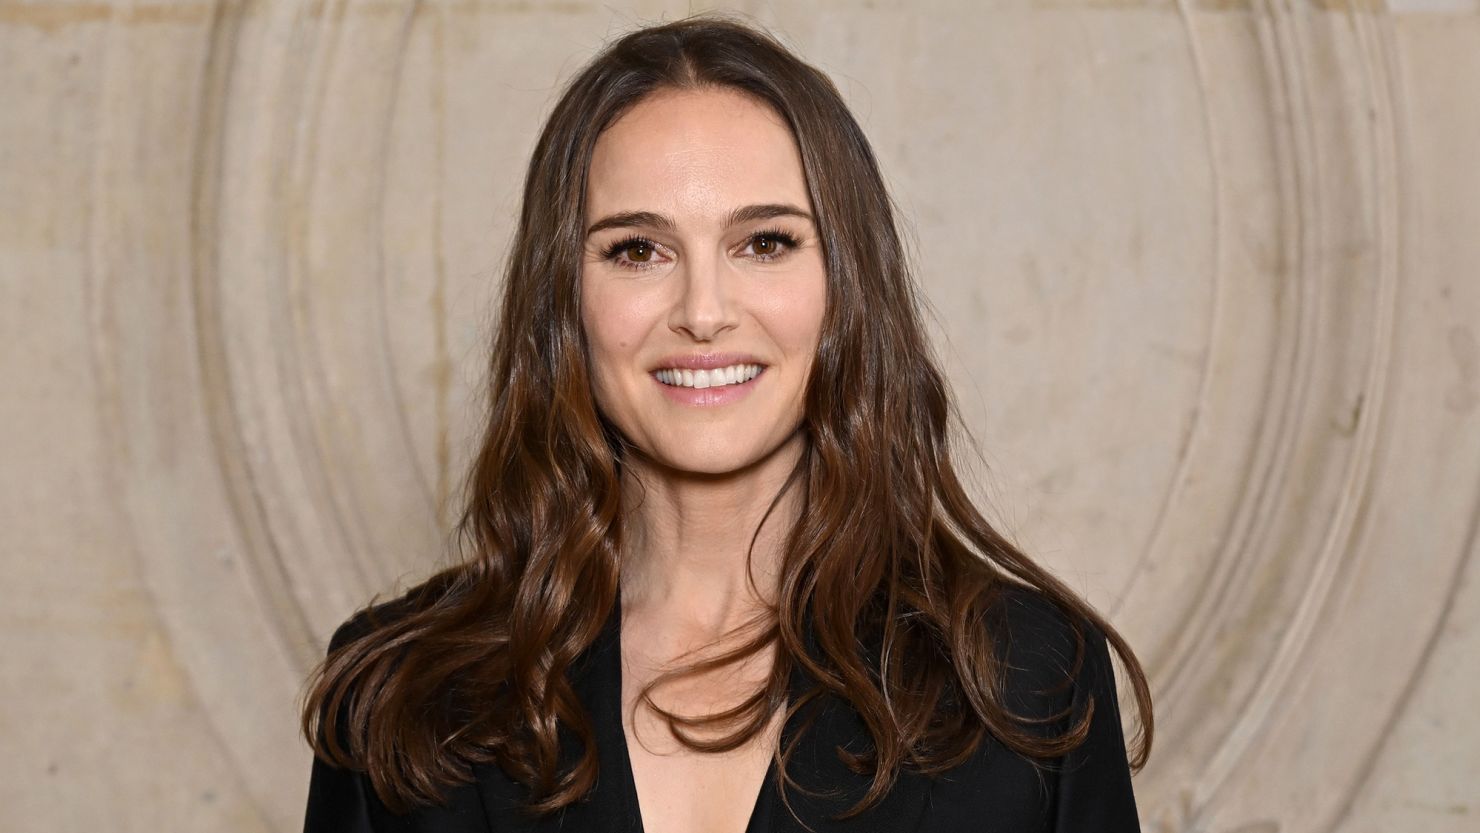 Natalie Portman explains how she protected herself from fame as a young